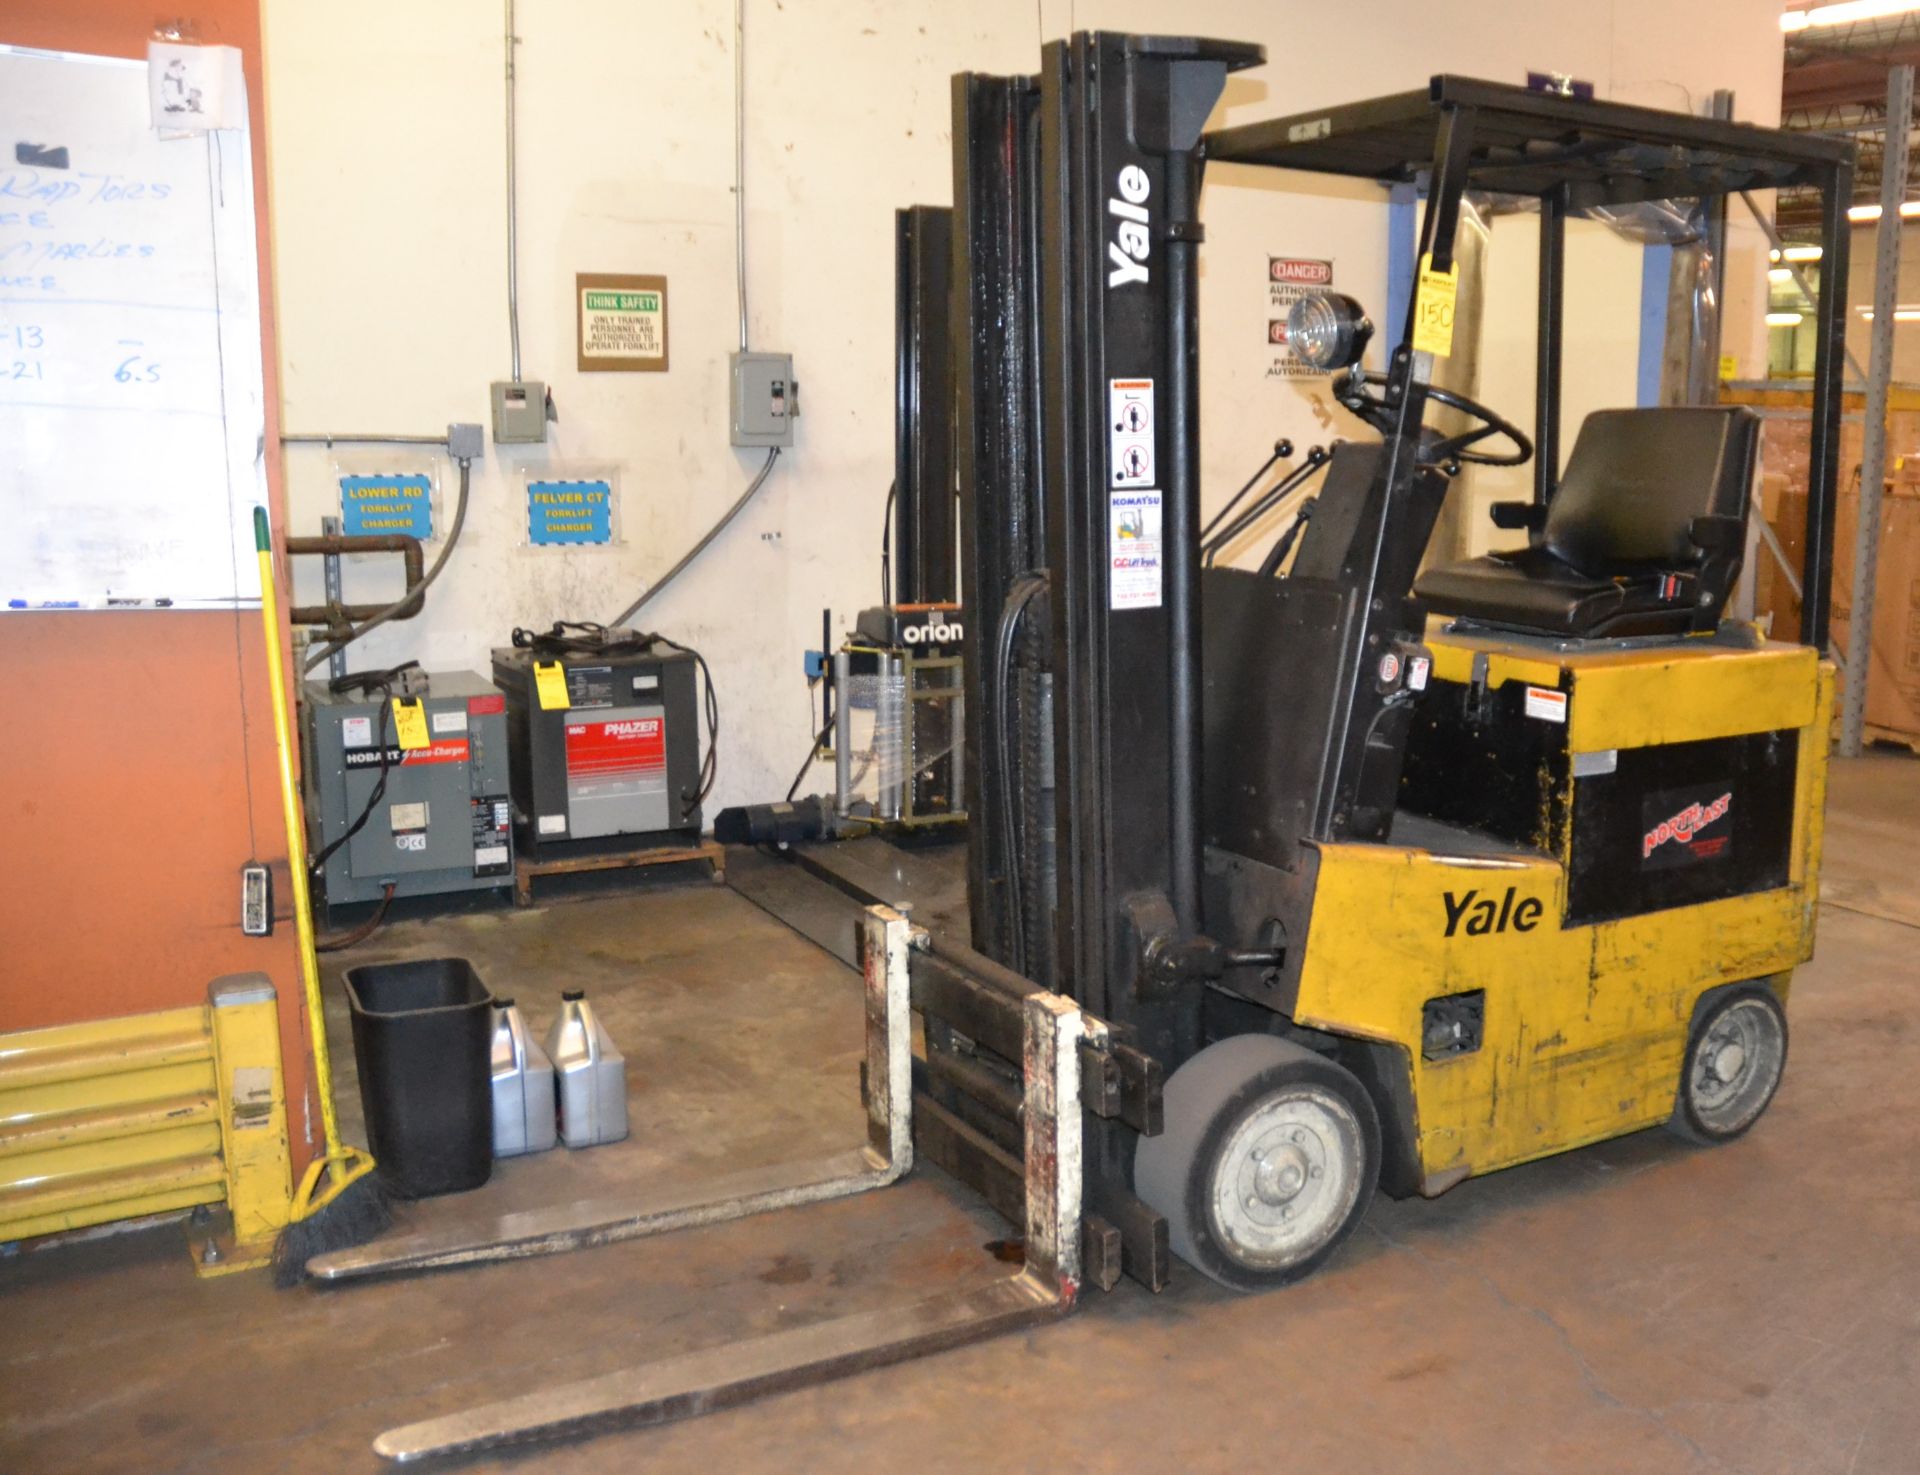 YALE ELECTRIC 4K LB. FORKLIFT W/ CHARGER